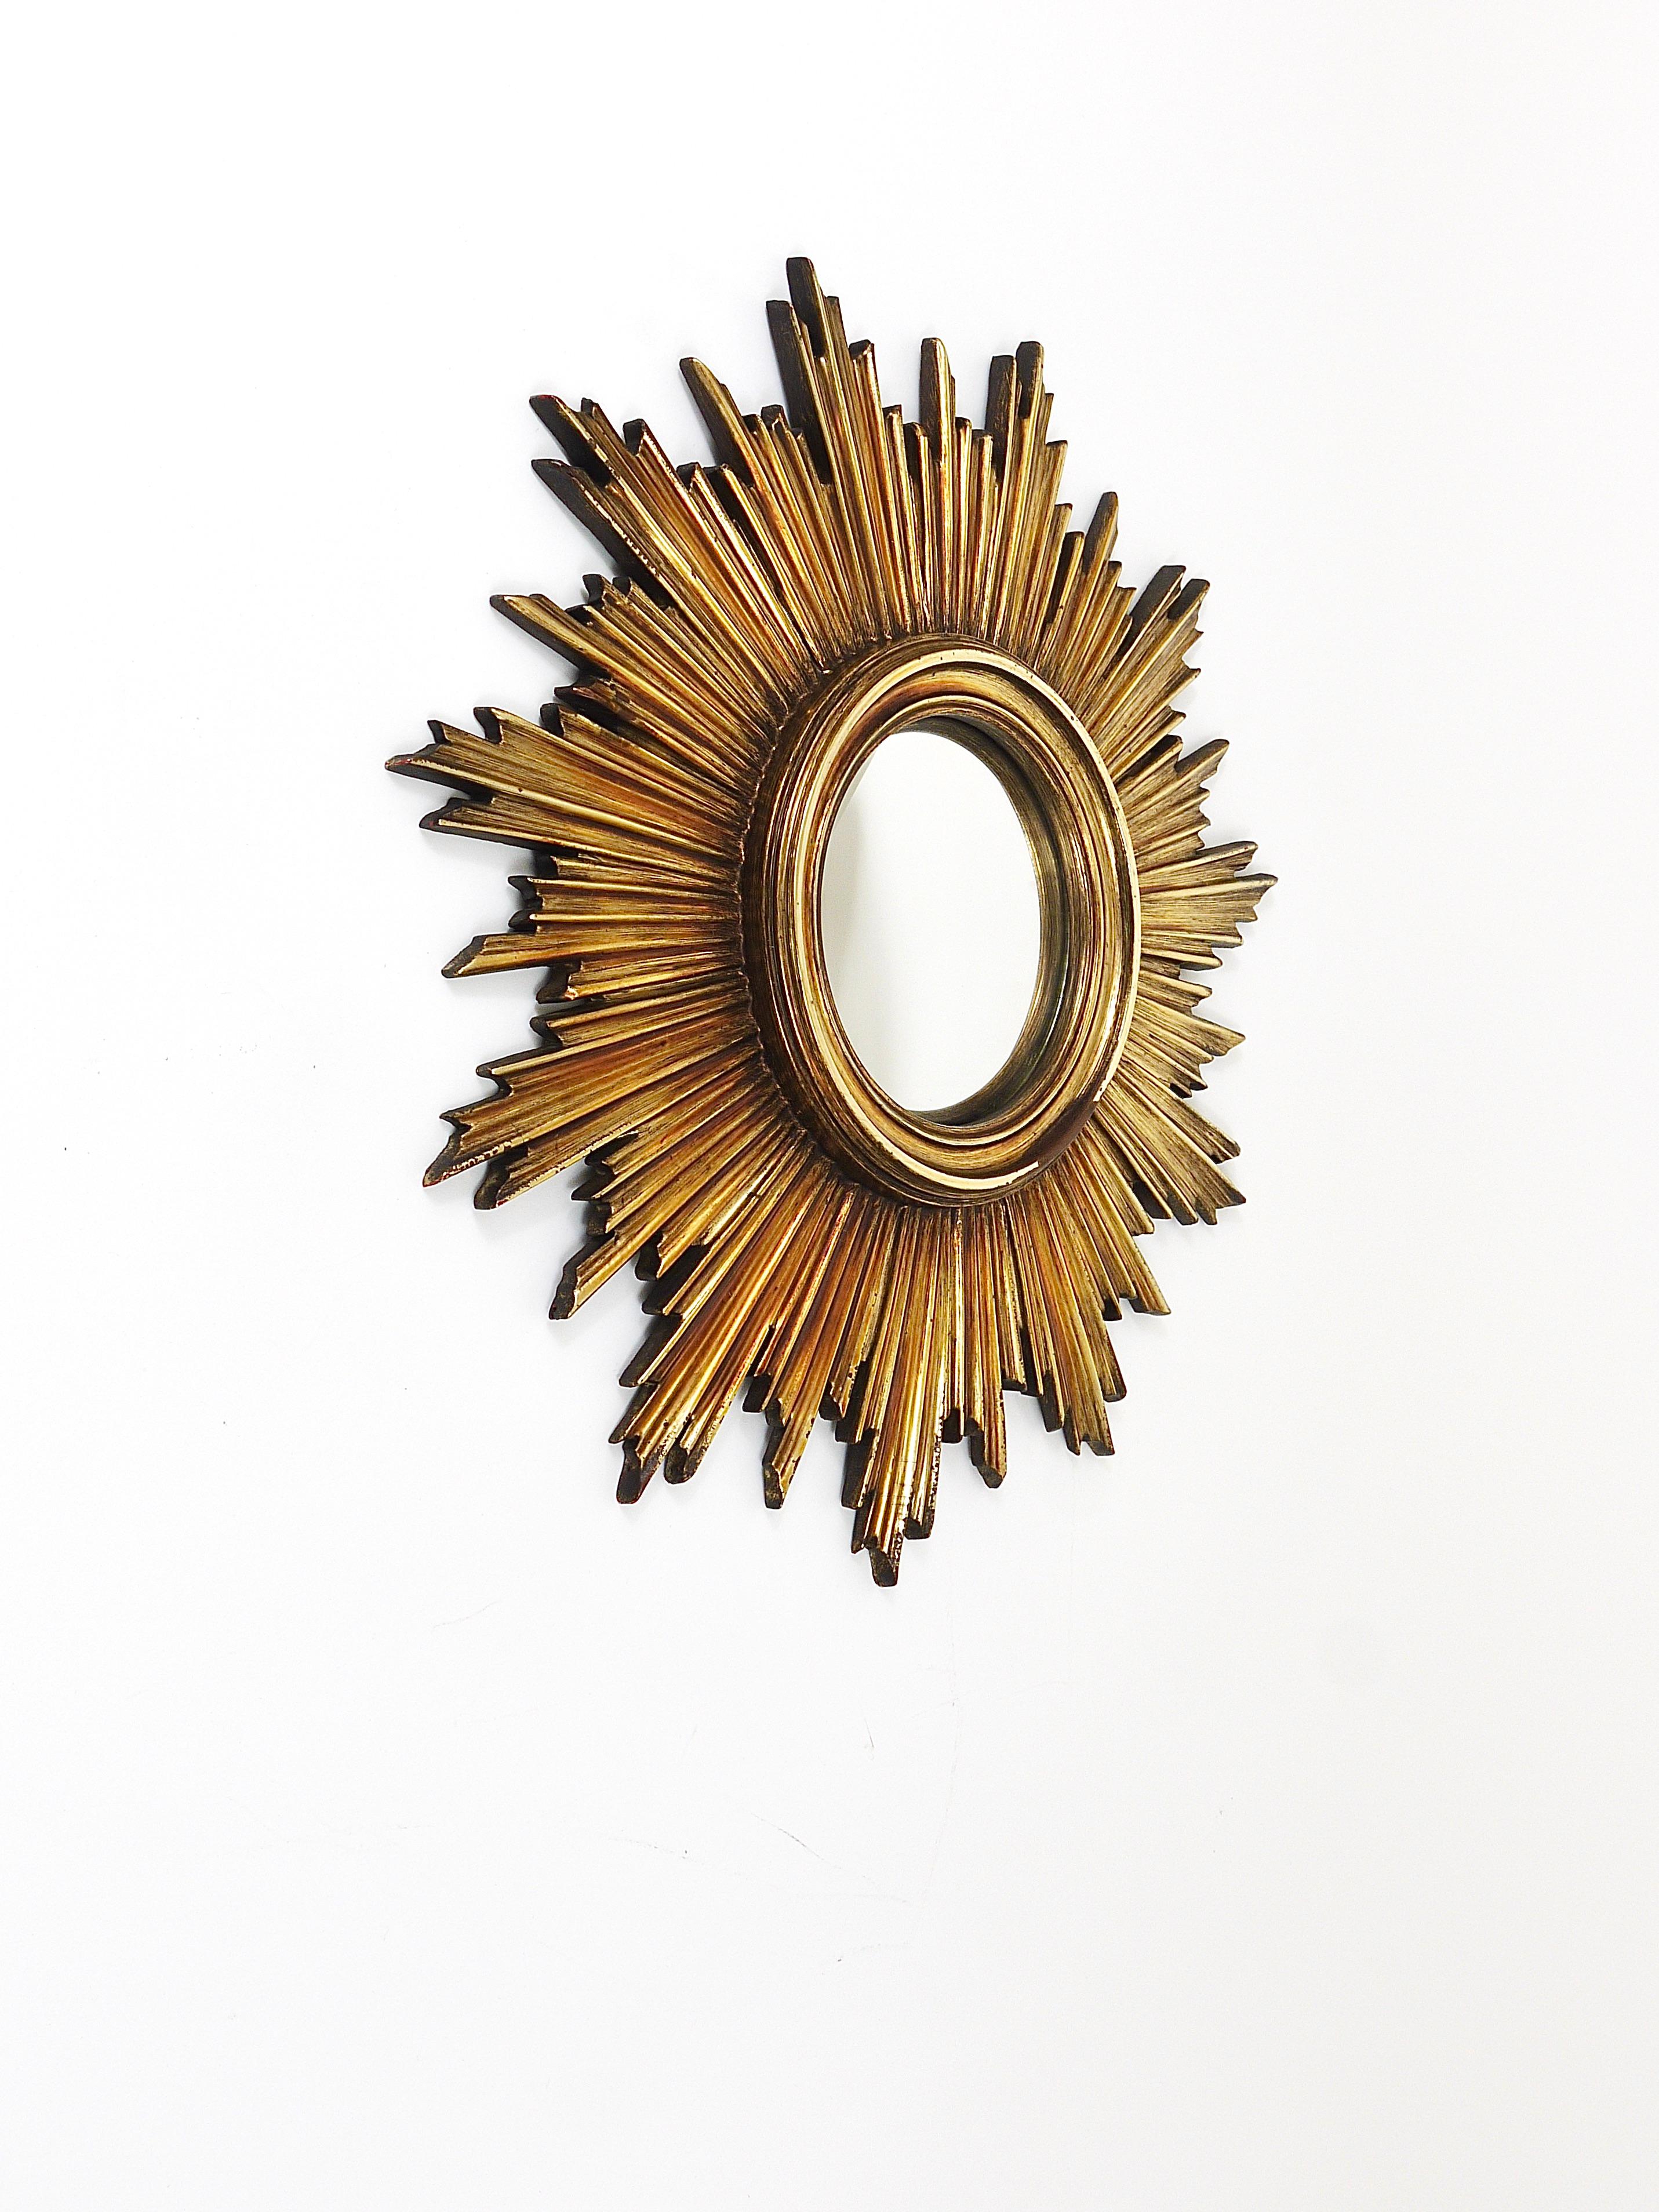 A very beautiful and decorative golden mid-century sunburst starburst mirror. Made in France in the 1960s. Made of resin, still with original convex mirror glass. In good condition. Total diameter 18“, the diameter of the mirror itself is 5 2/3“.